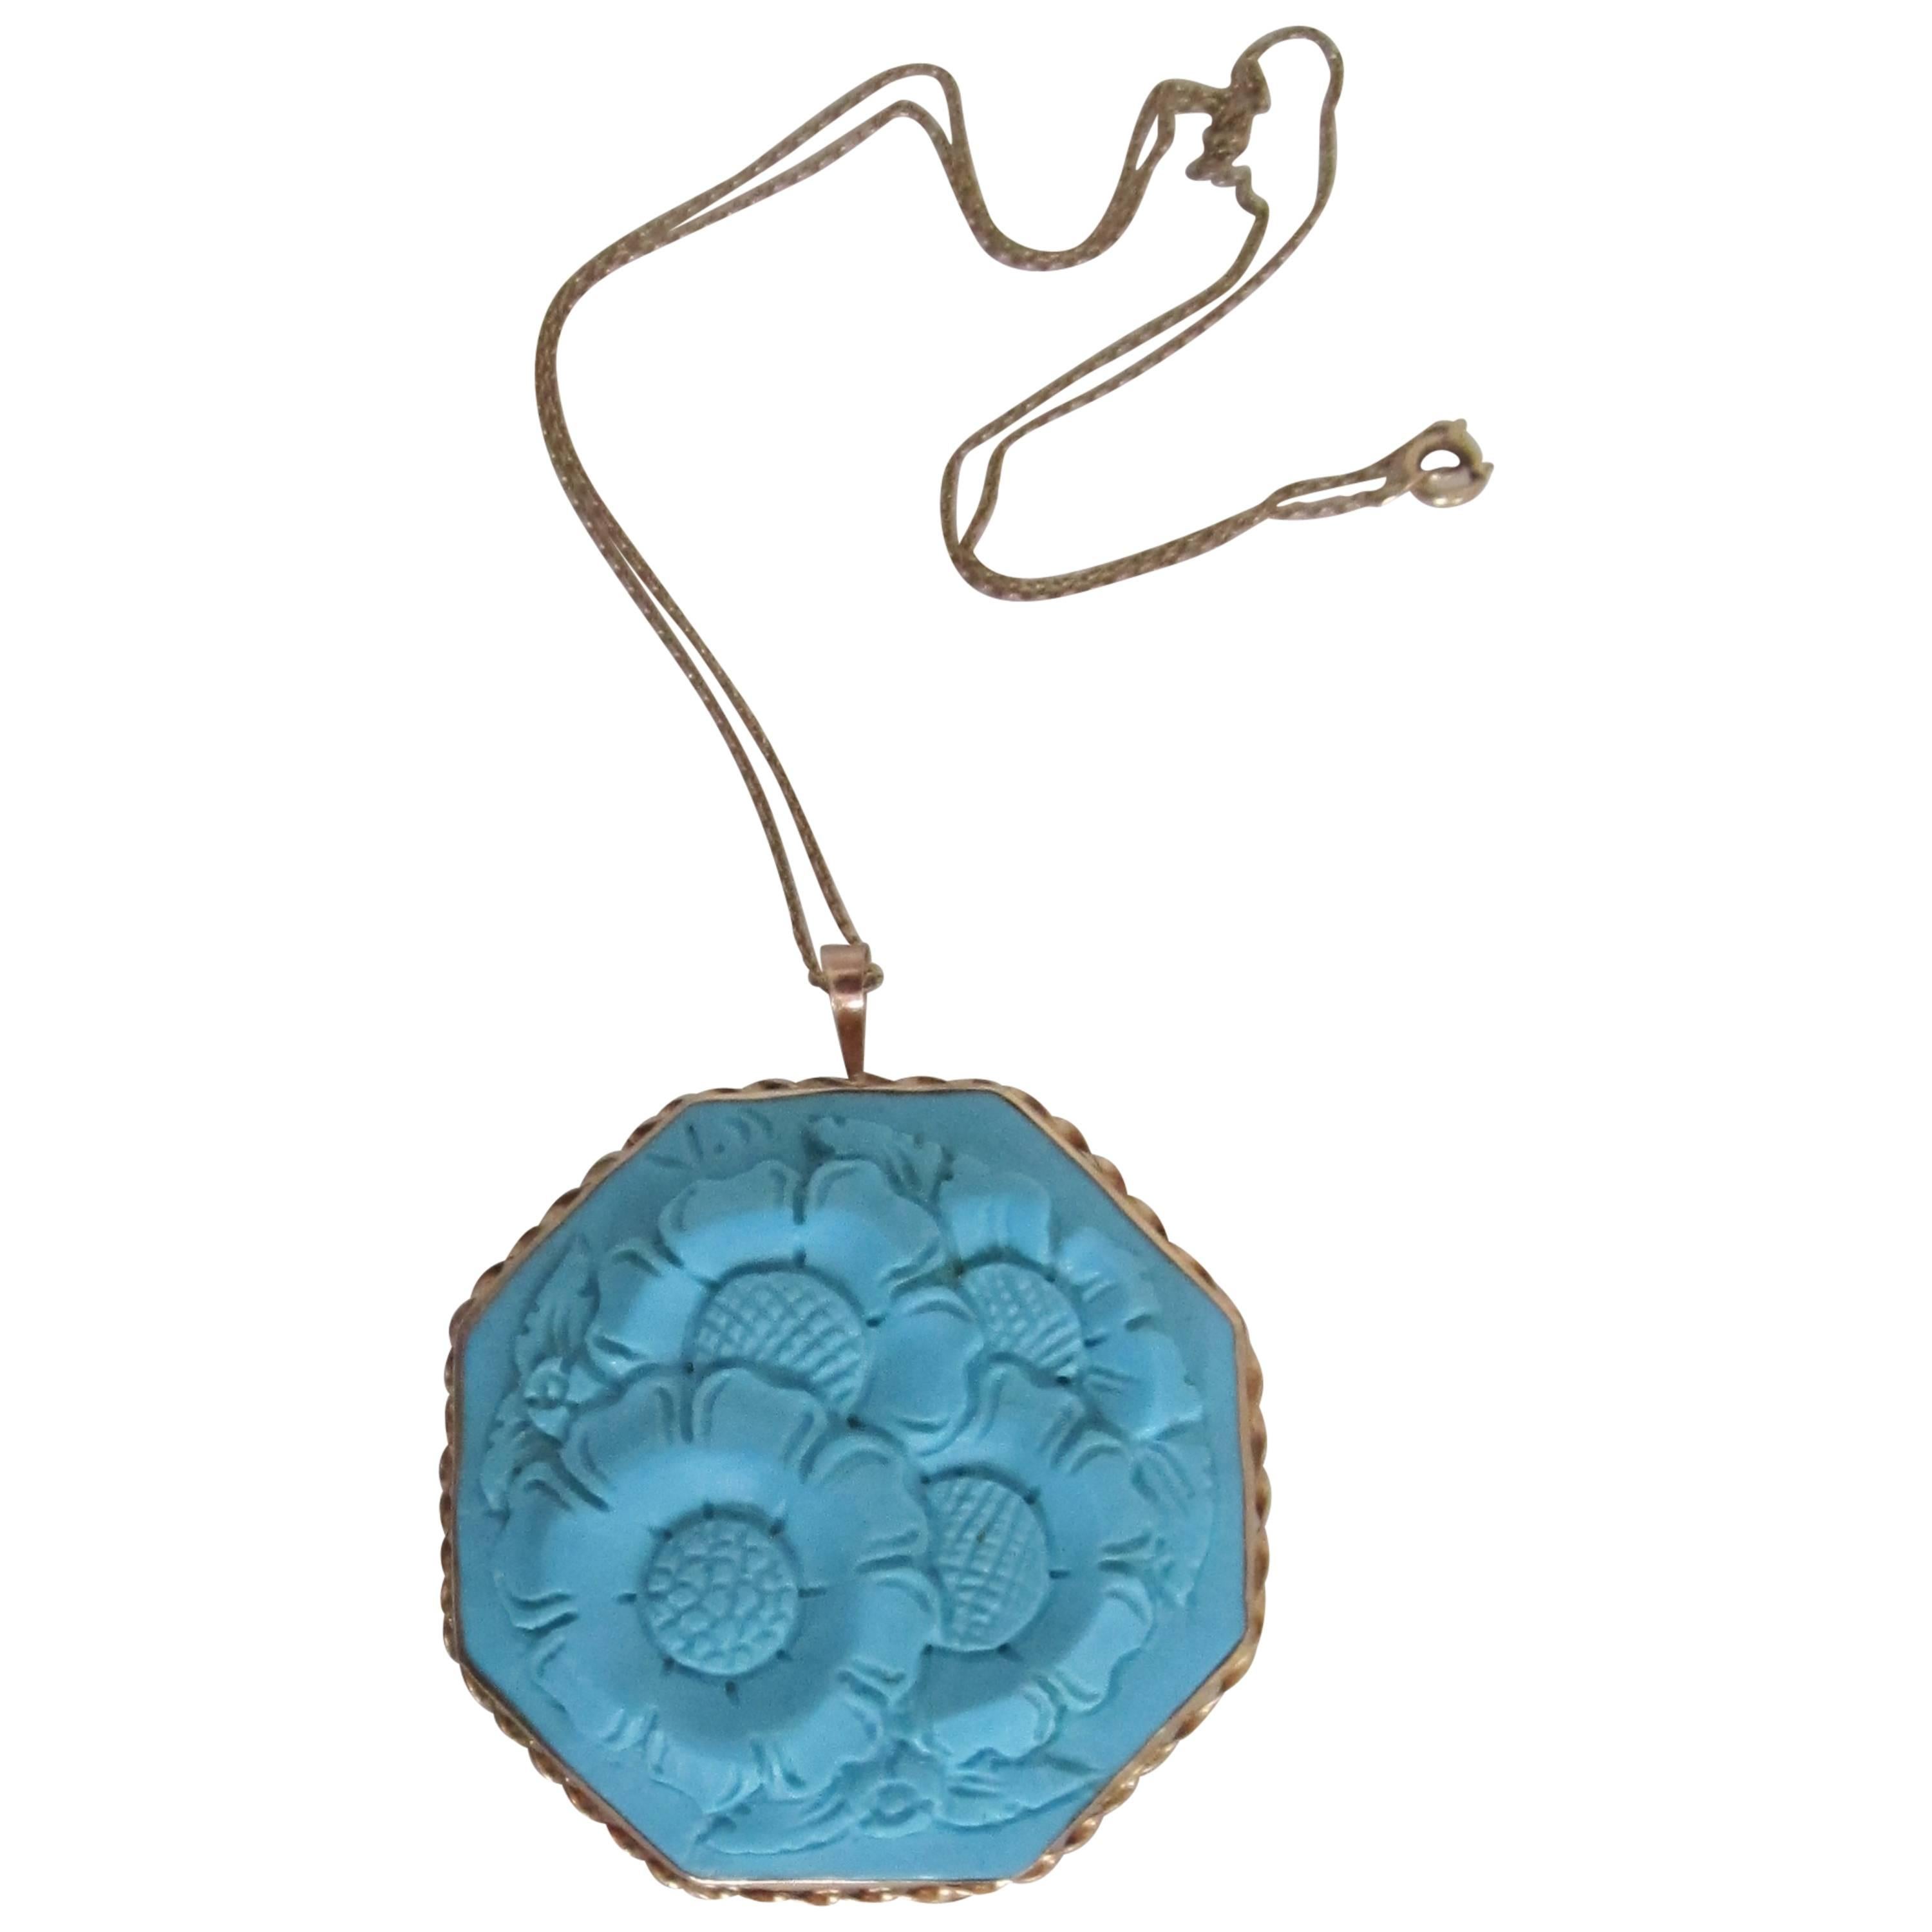 20th Century Italian Turquoise and 14-Karat Gold Pendant Necklace and Brooch Buccellati Style